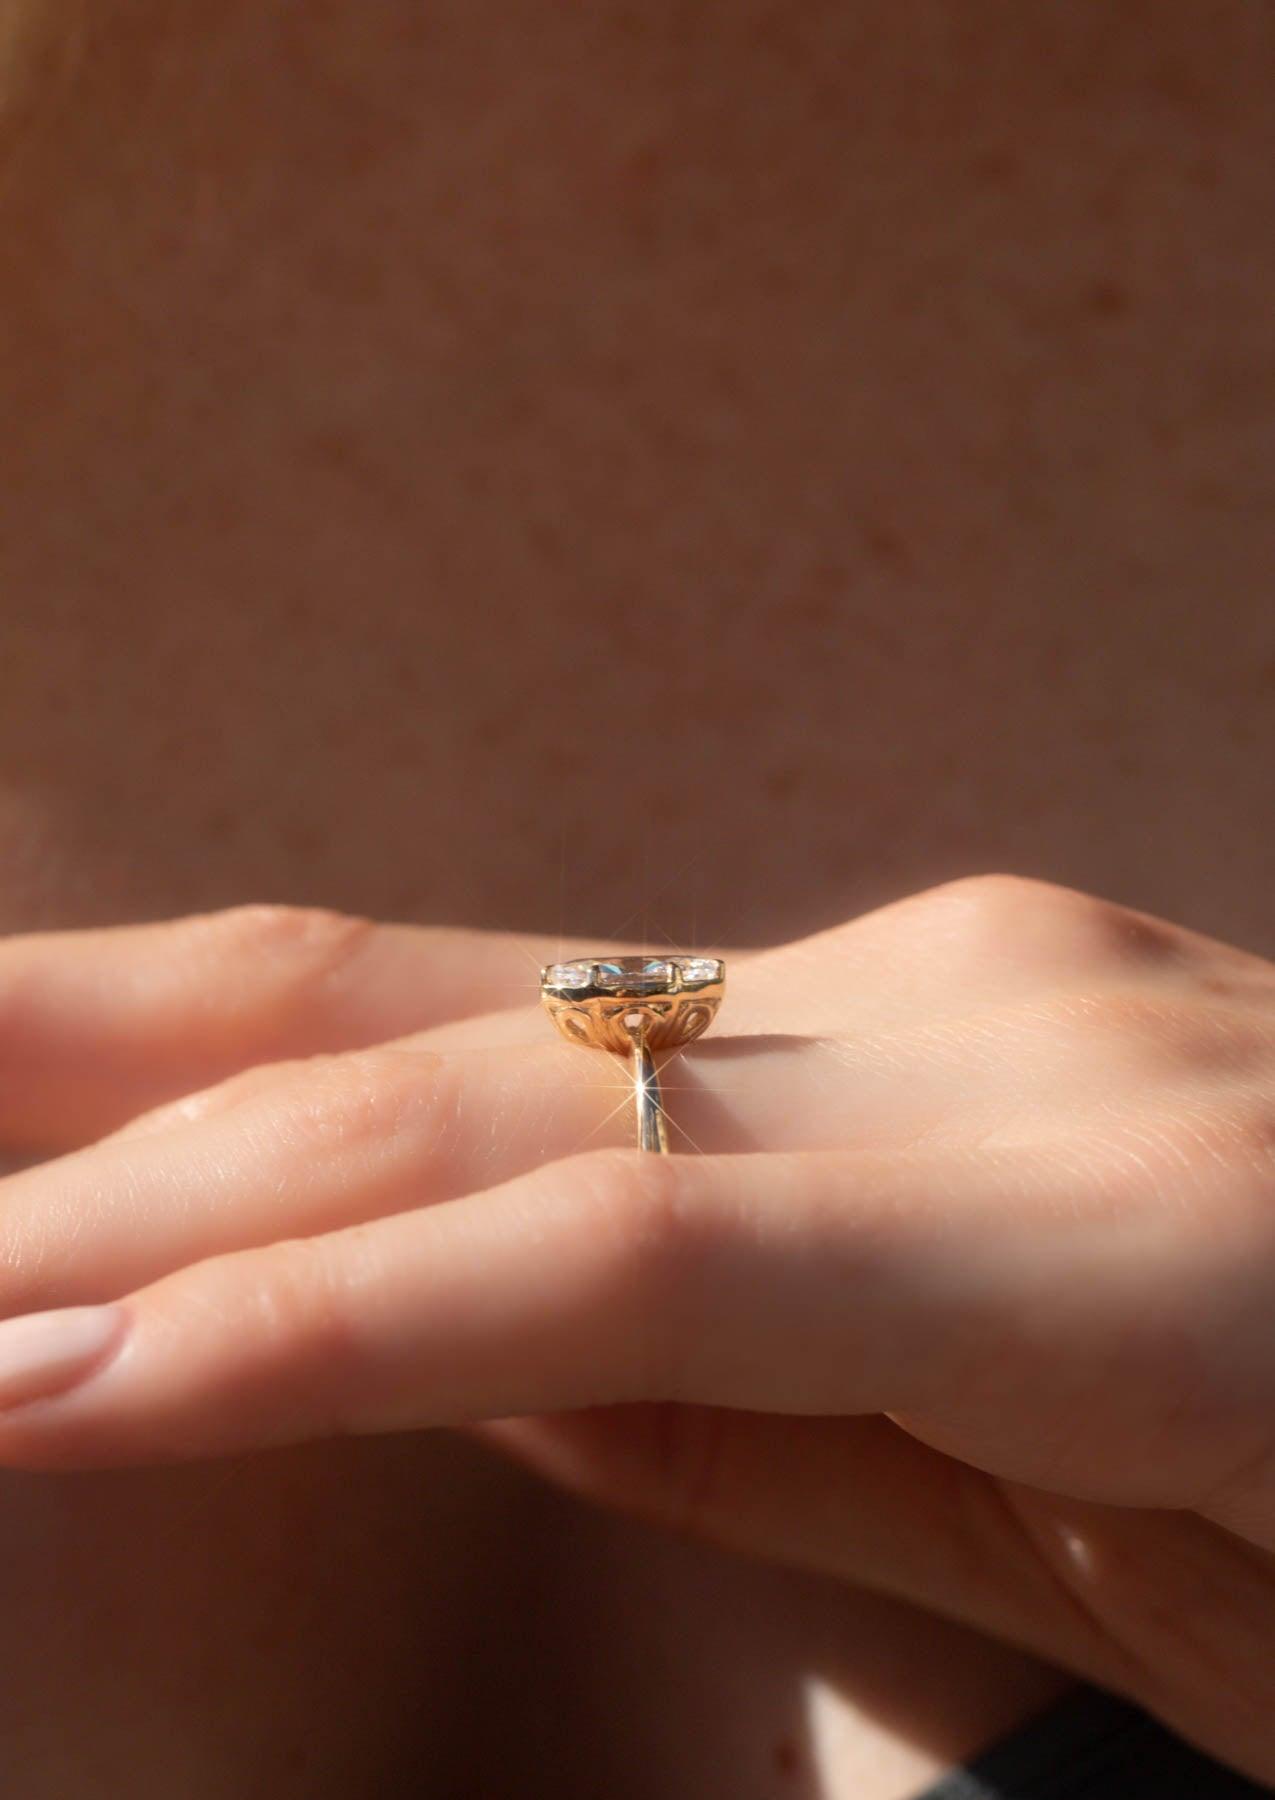 The Mabel Rose Gold Cultured Diamond Ring